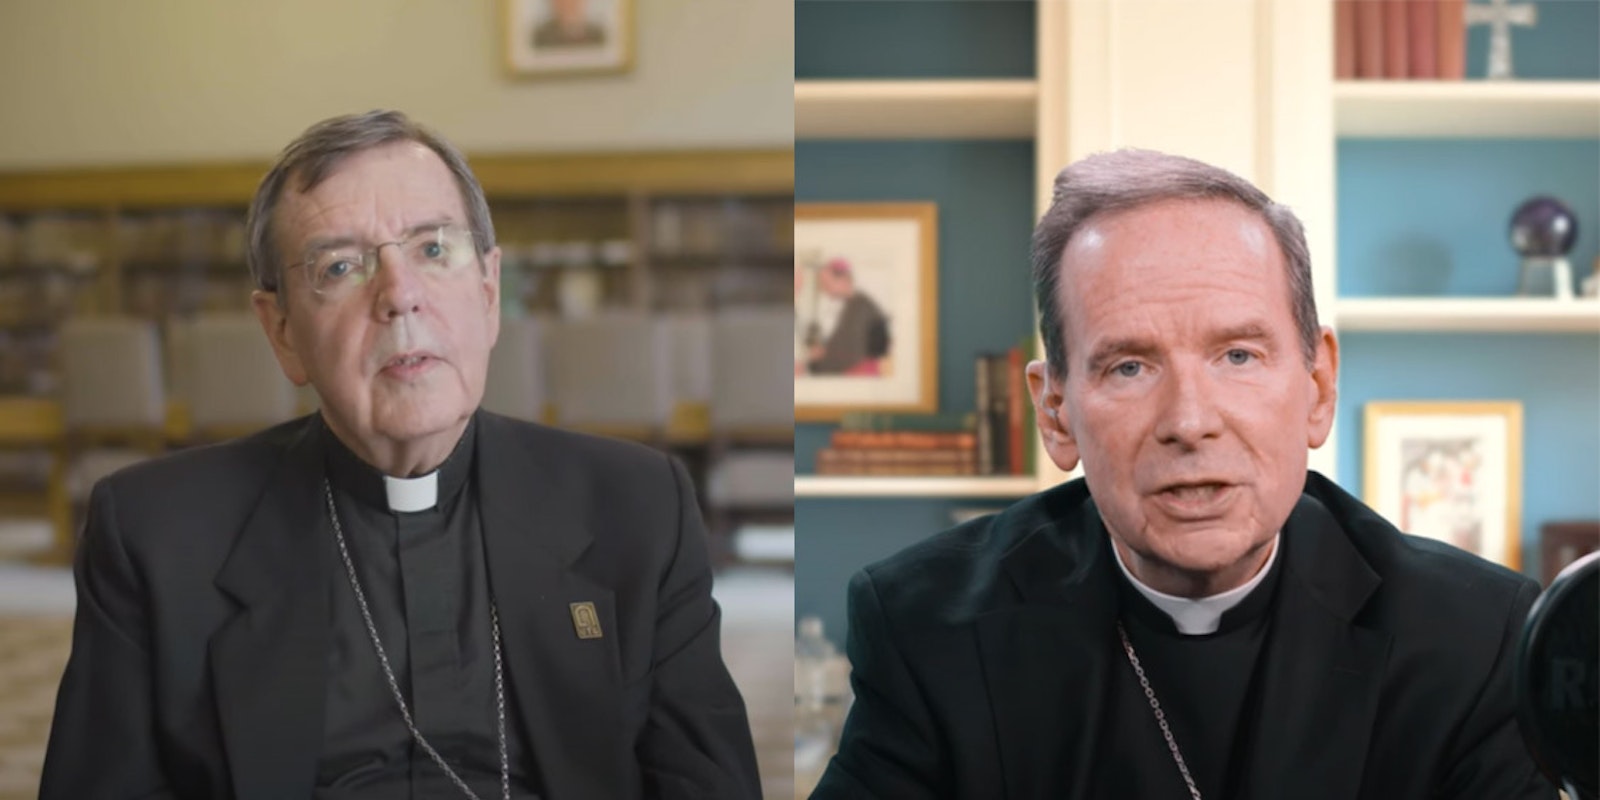 Detroit Archbishop Allen H. Vigneron, left, and Arlington, Va., Bishop Michael F. Burbidge take part in a virtual discussion about the role of digital and social media in today's Catholic landscape. The bishops' discussion was part of a two-part digital event called "Digital Transformation and the Catholic Church: Bringing Truth and Hope in the Modern Age." (Screenshots via YouTube)